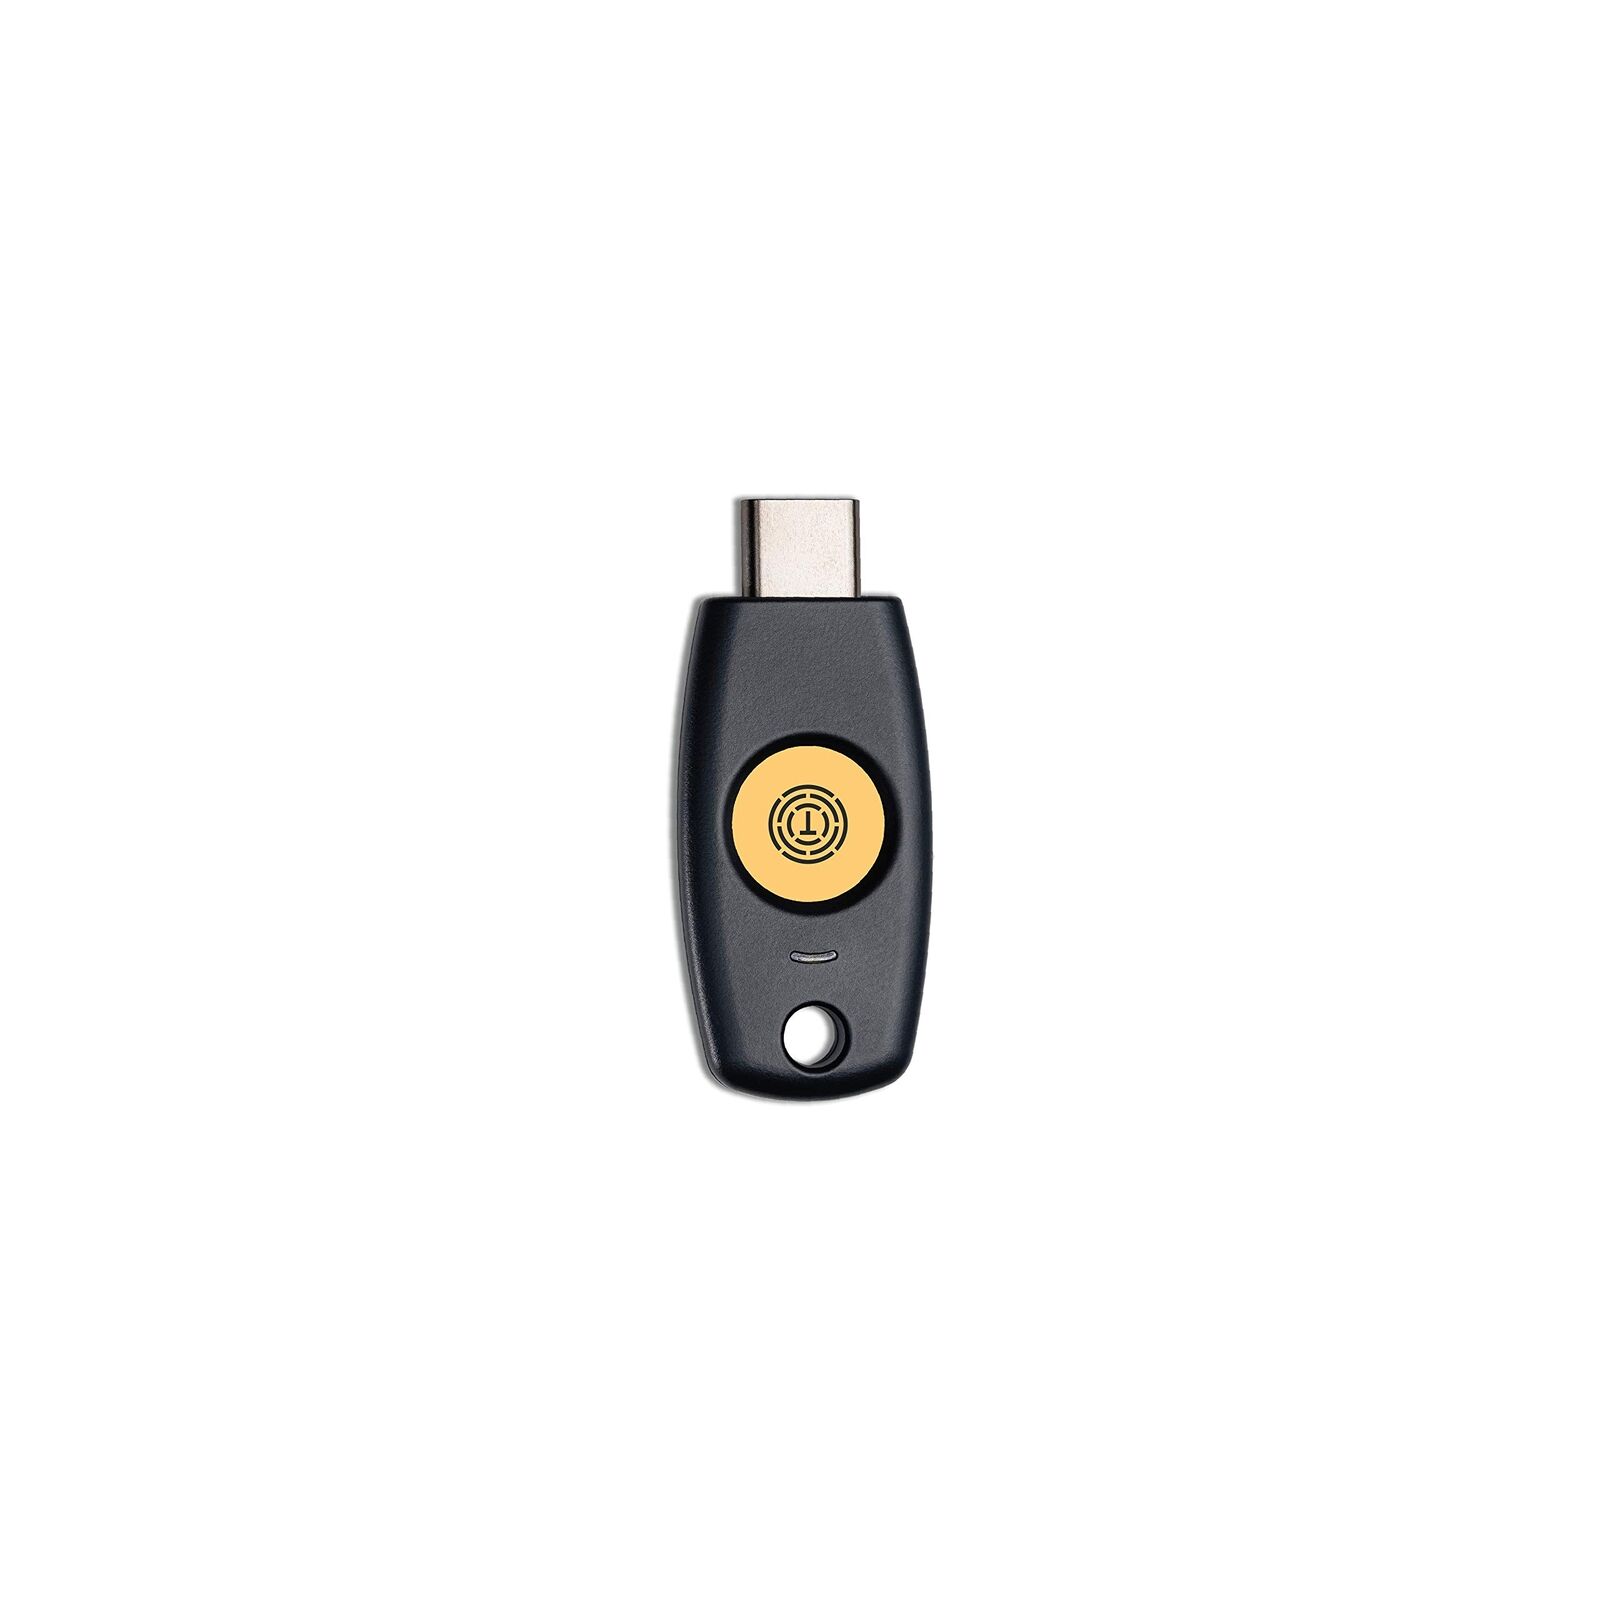 FIDO2 U2F Security Key Passkey Two-Factor Authentication (2FA) USB Key Pin+To...